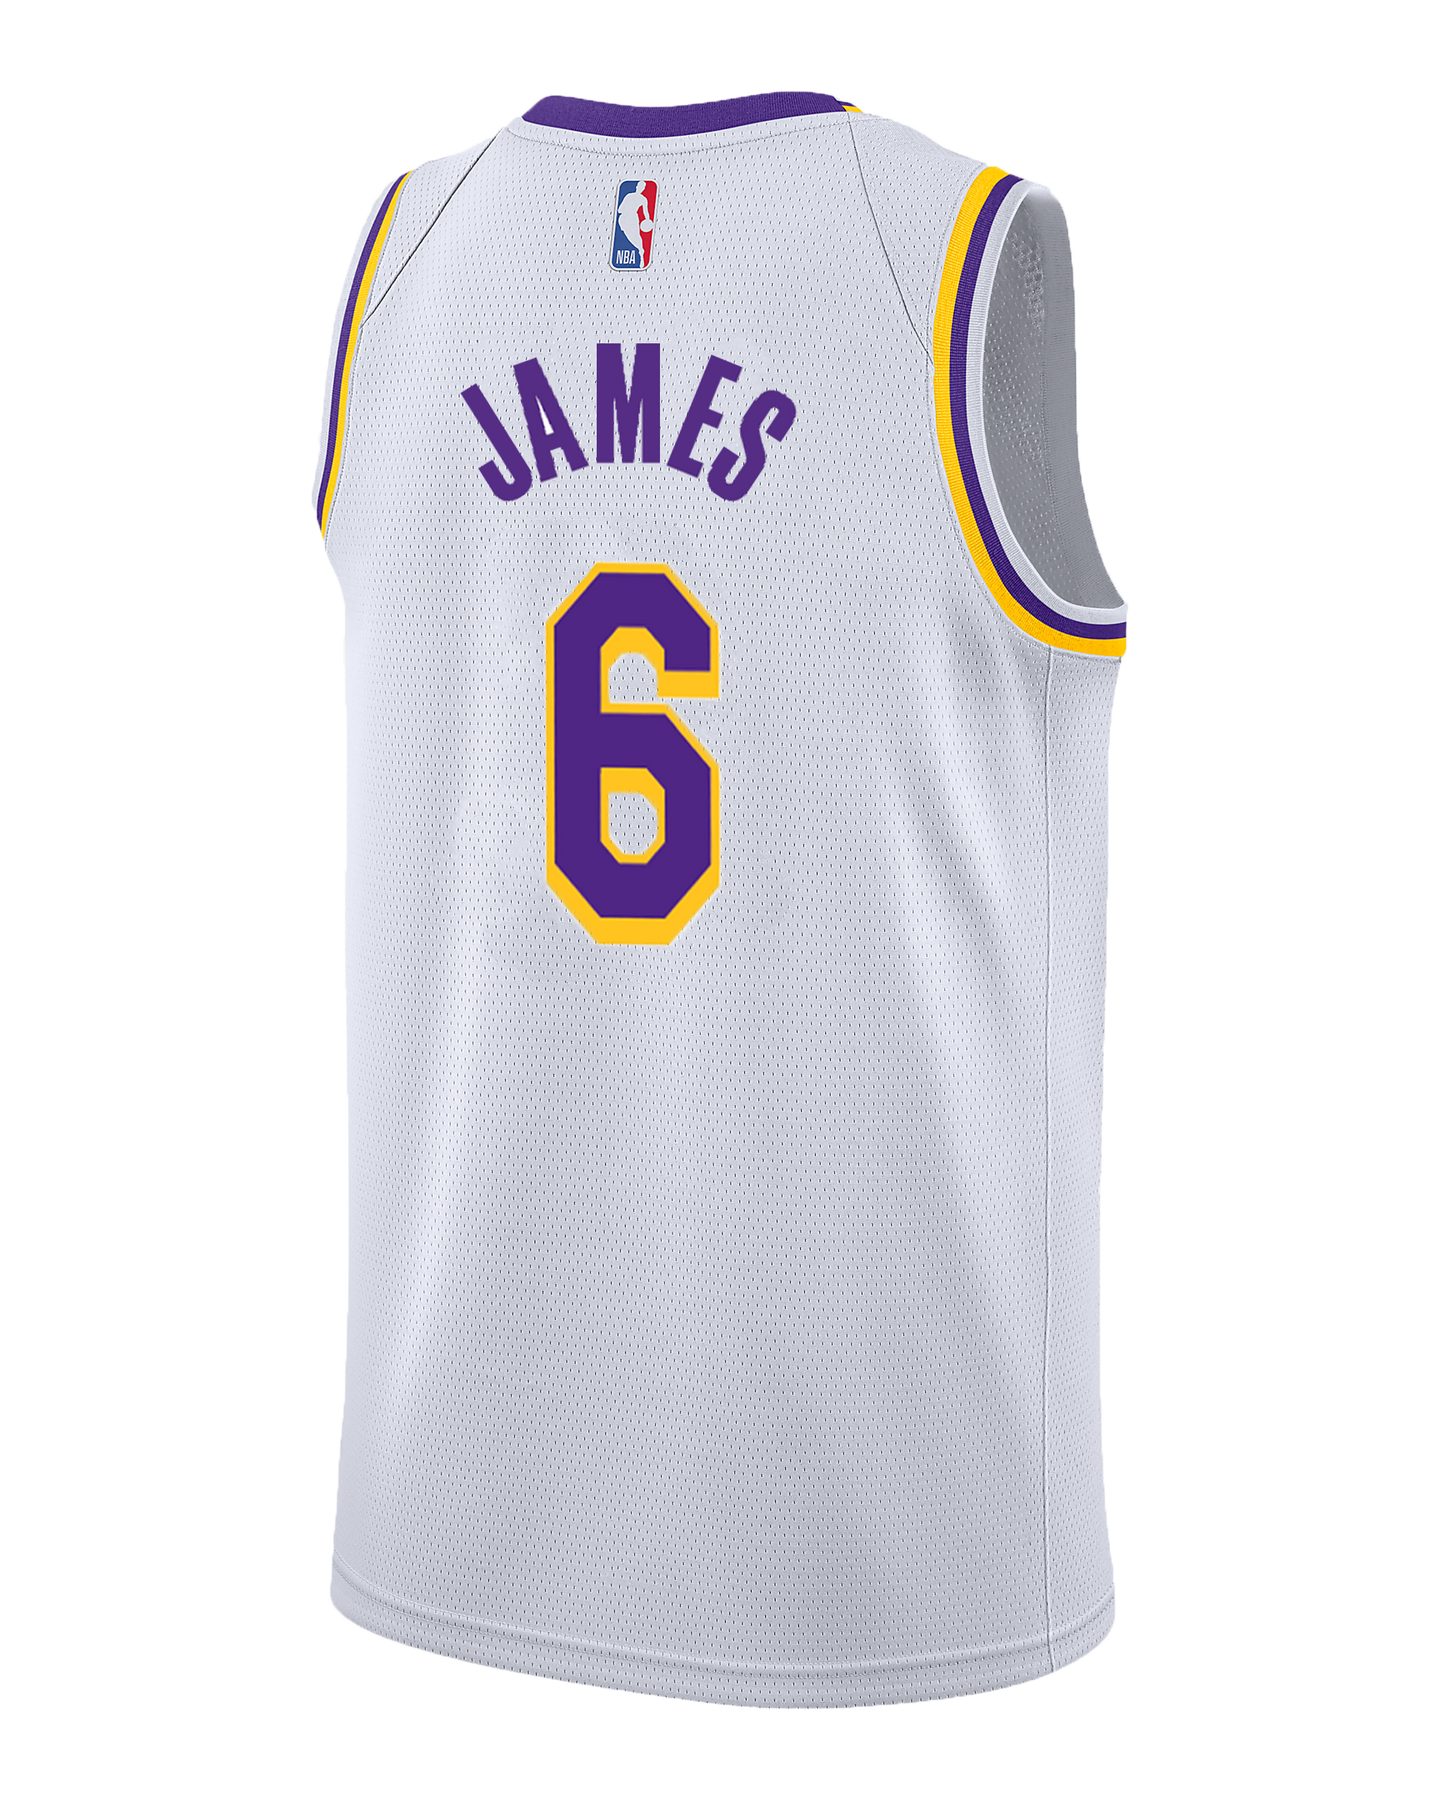 Awesome Artifacts LeBron James Los Angeles Lakers Jersey #6 Signed with Proof by Awesome Artifact